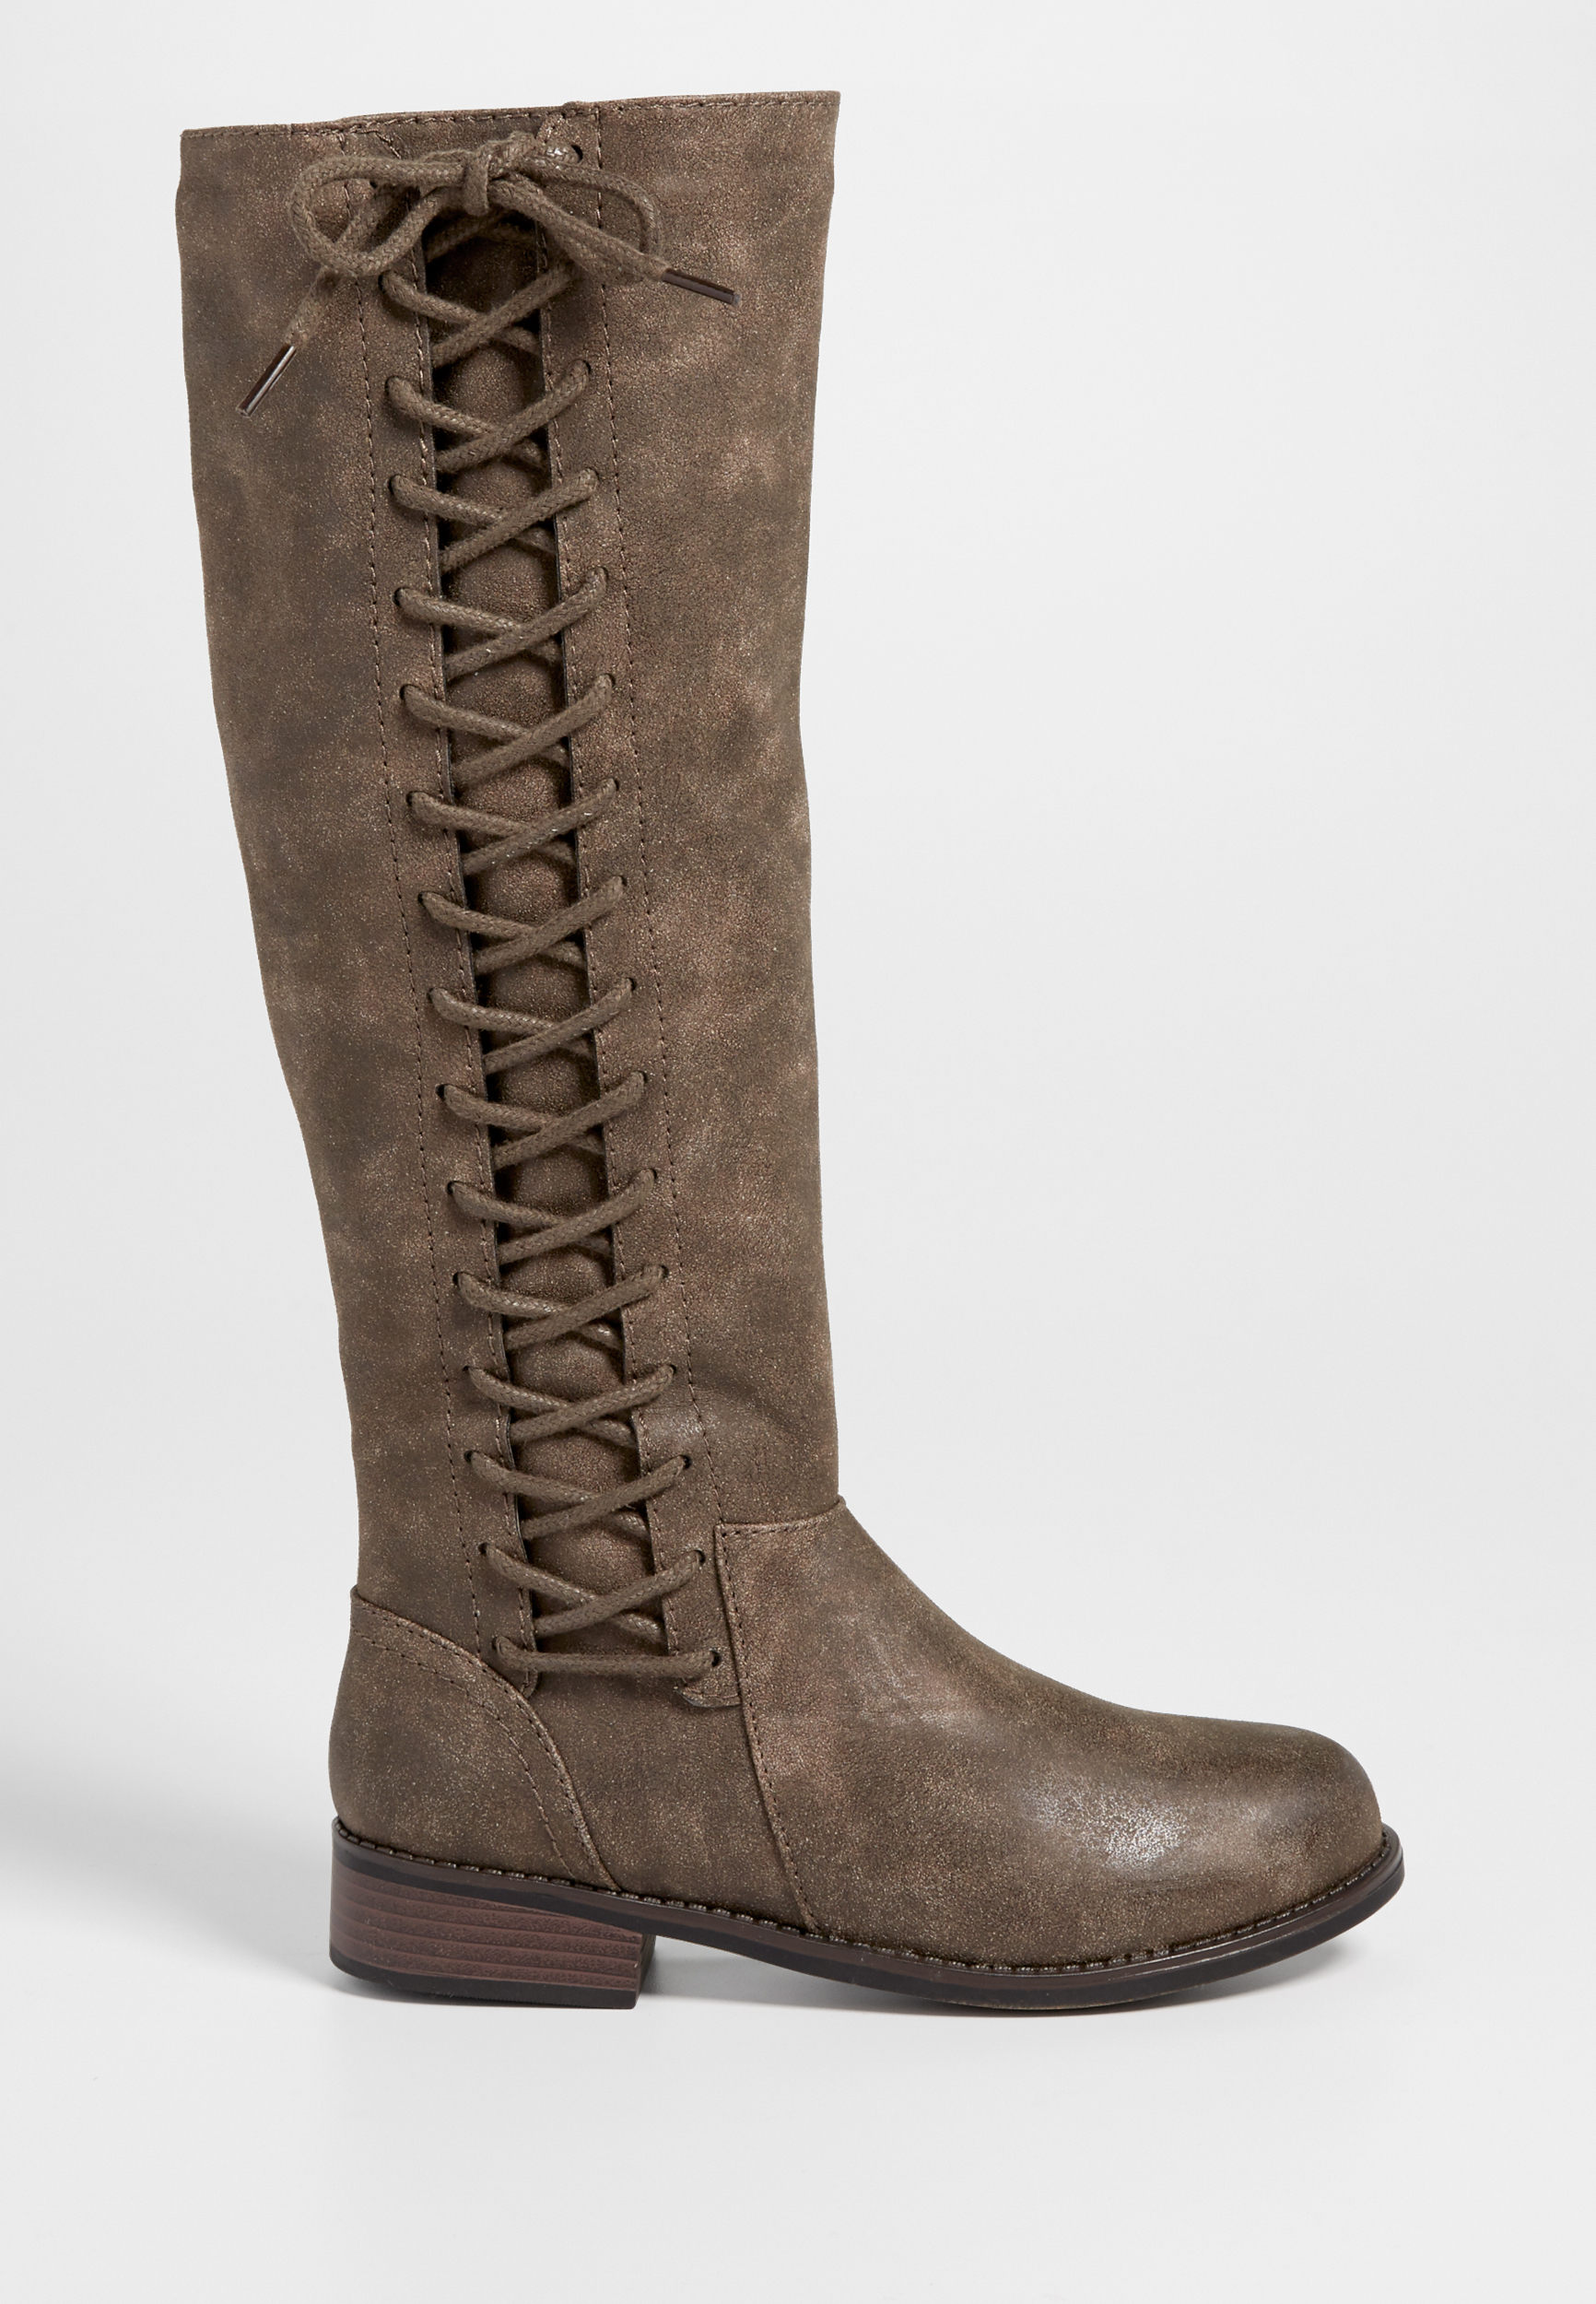 Sharon boot with lace up side in taupe | maurices